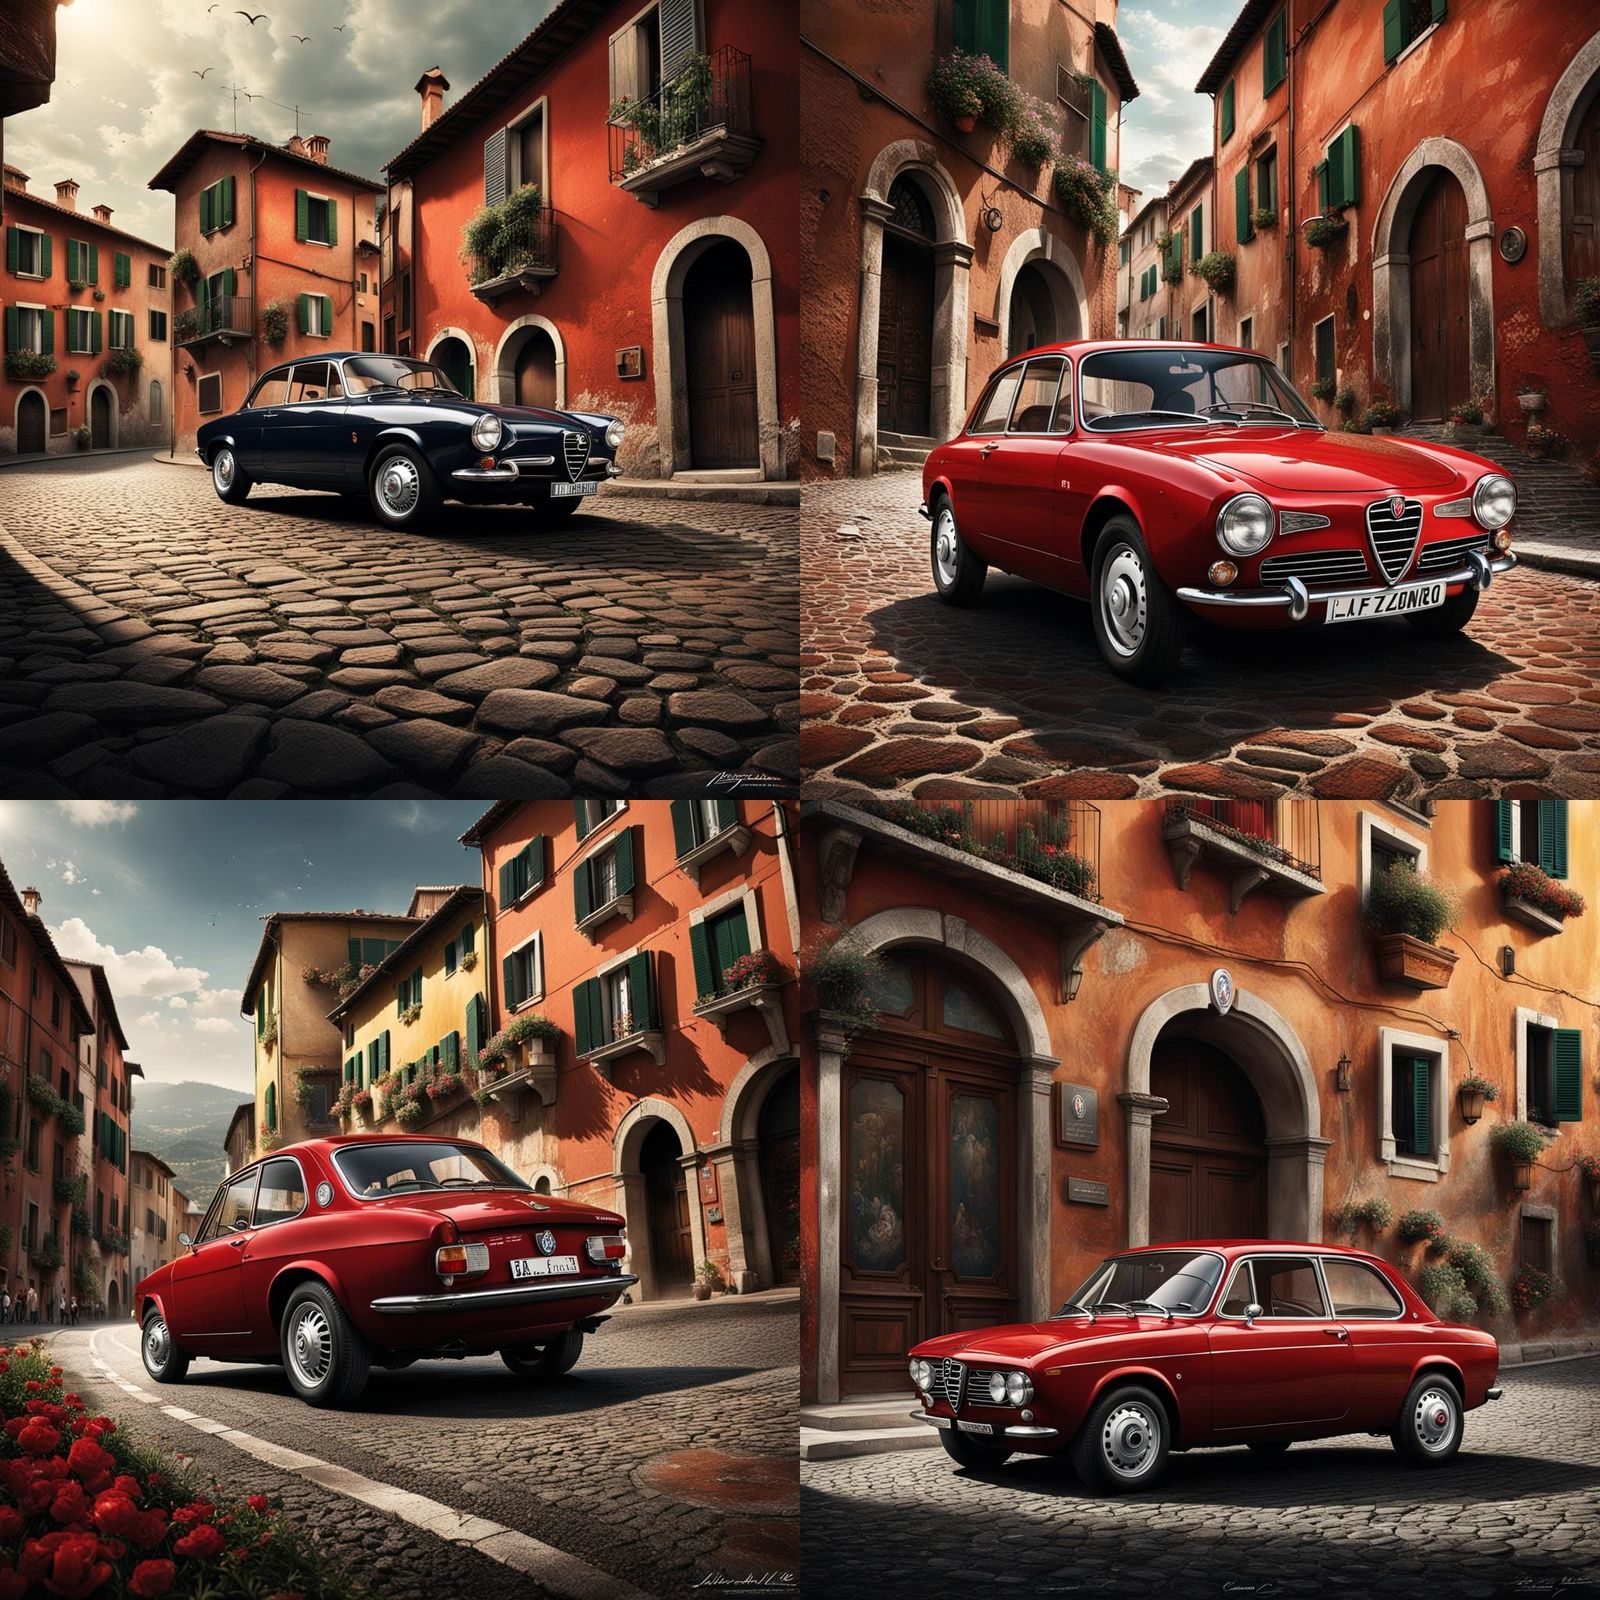 The Italian passion for cars